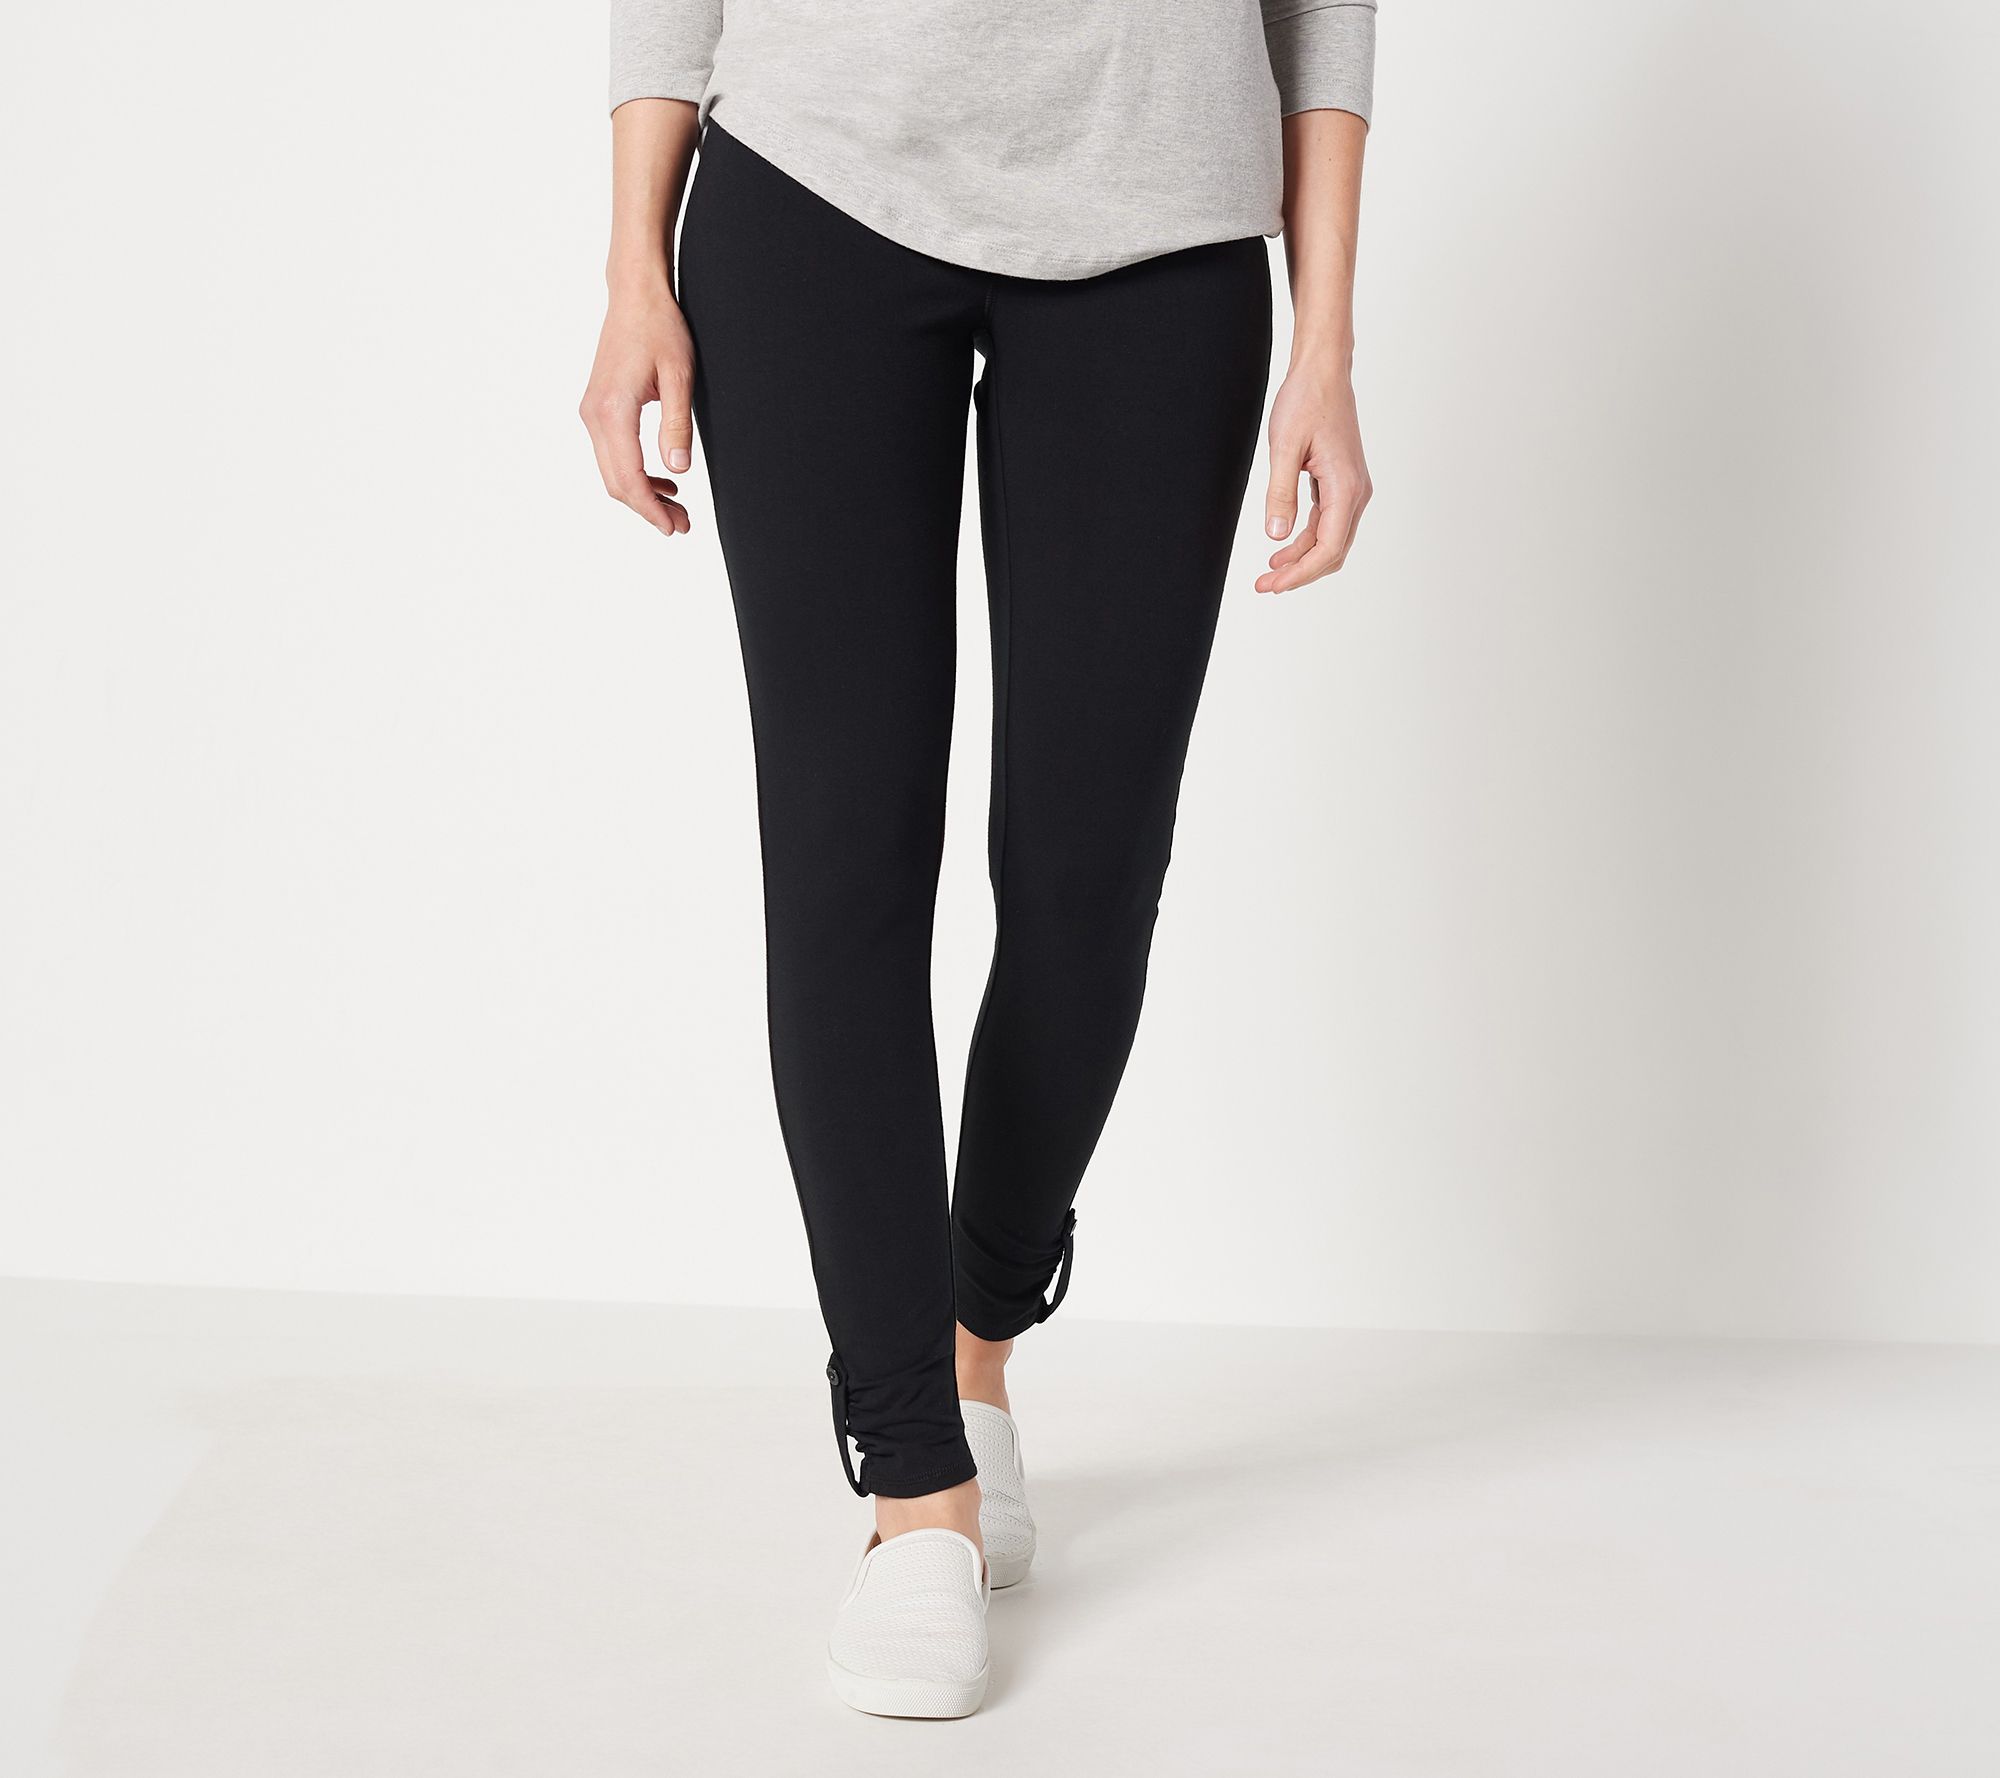 Denim & Co. Active Petite Duo Stretch Pant with Side Pocket 